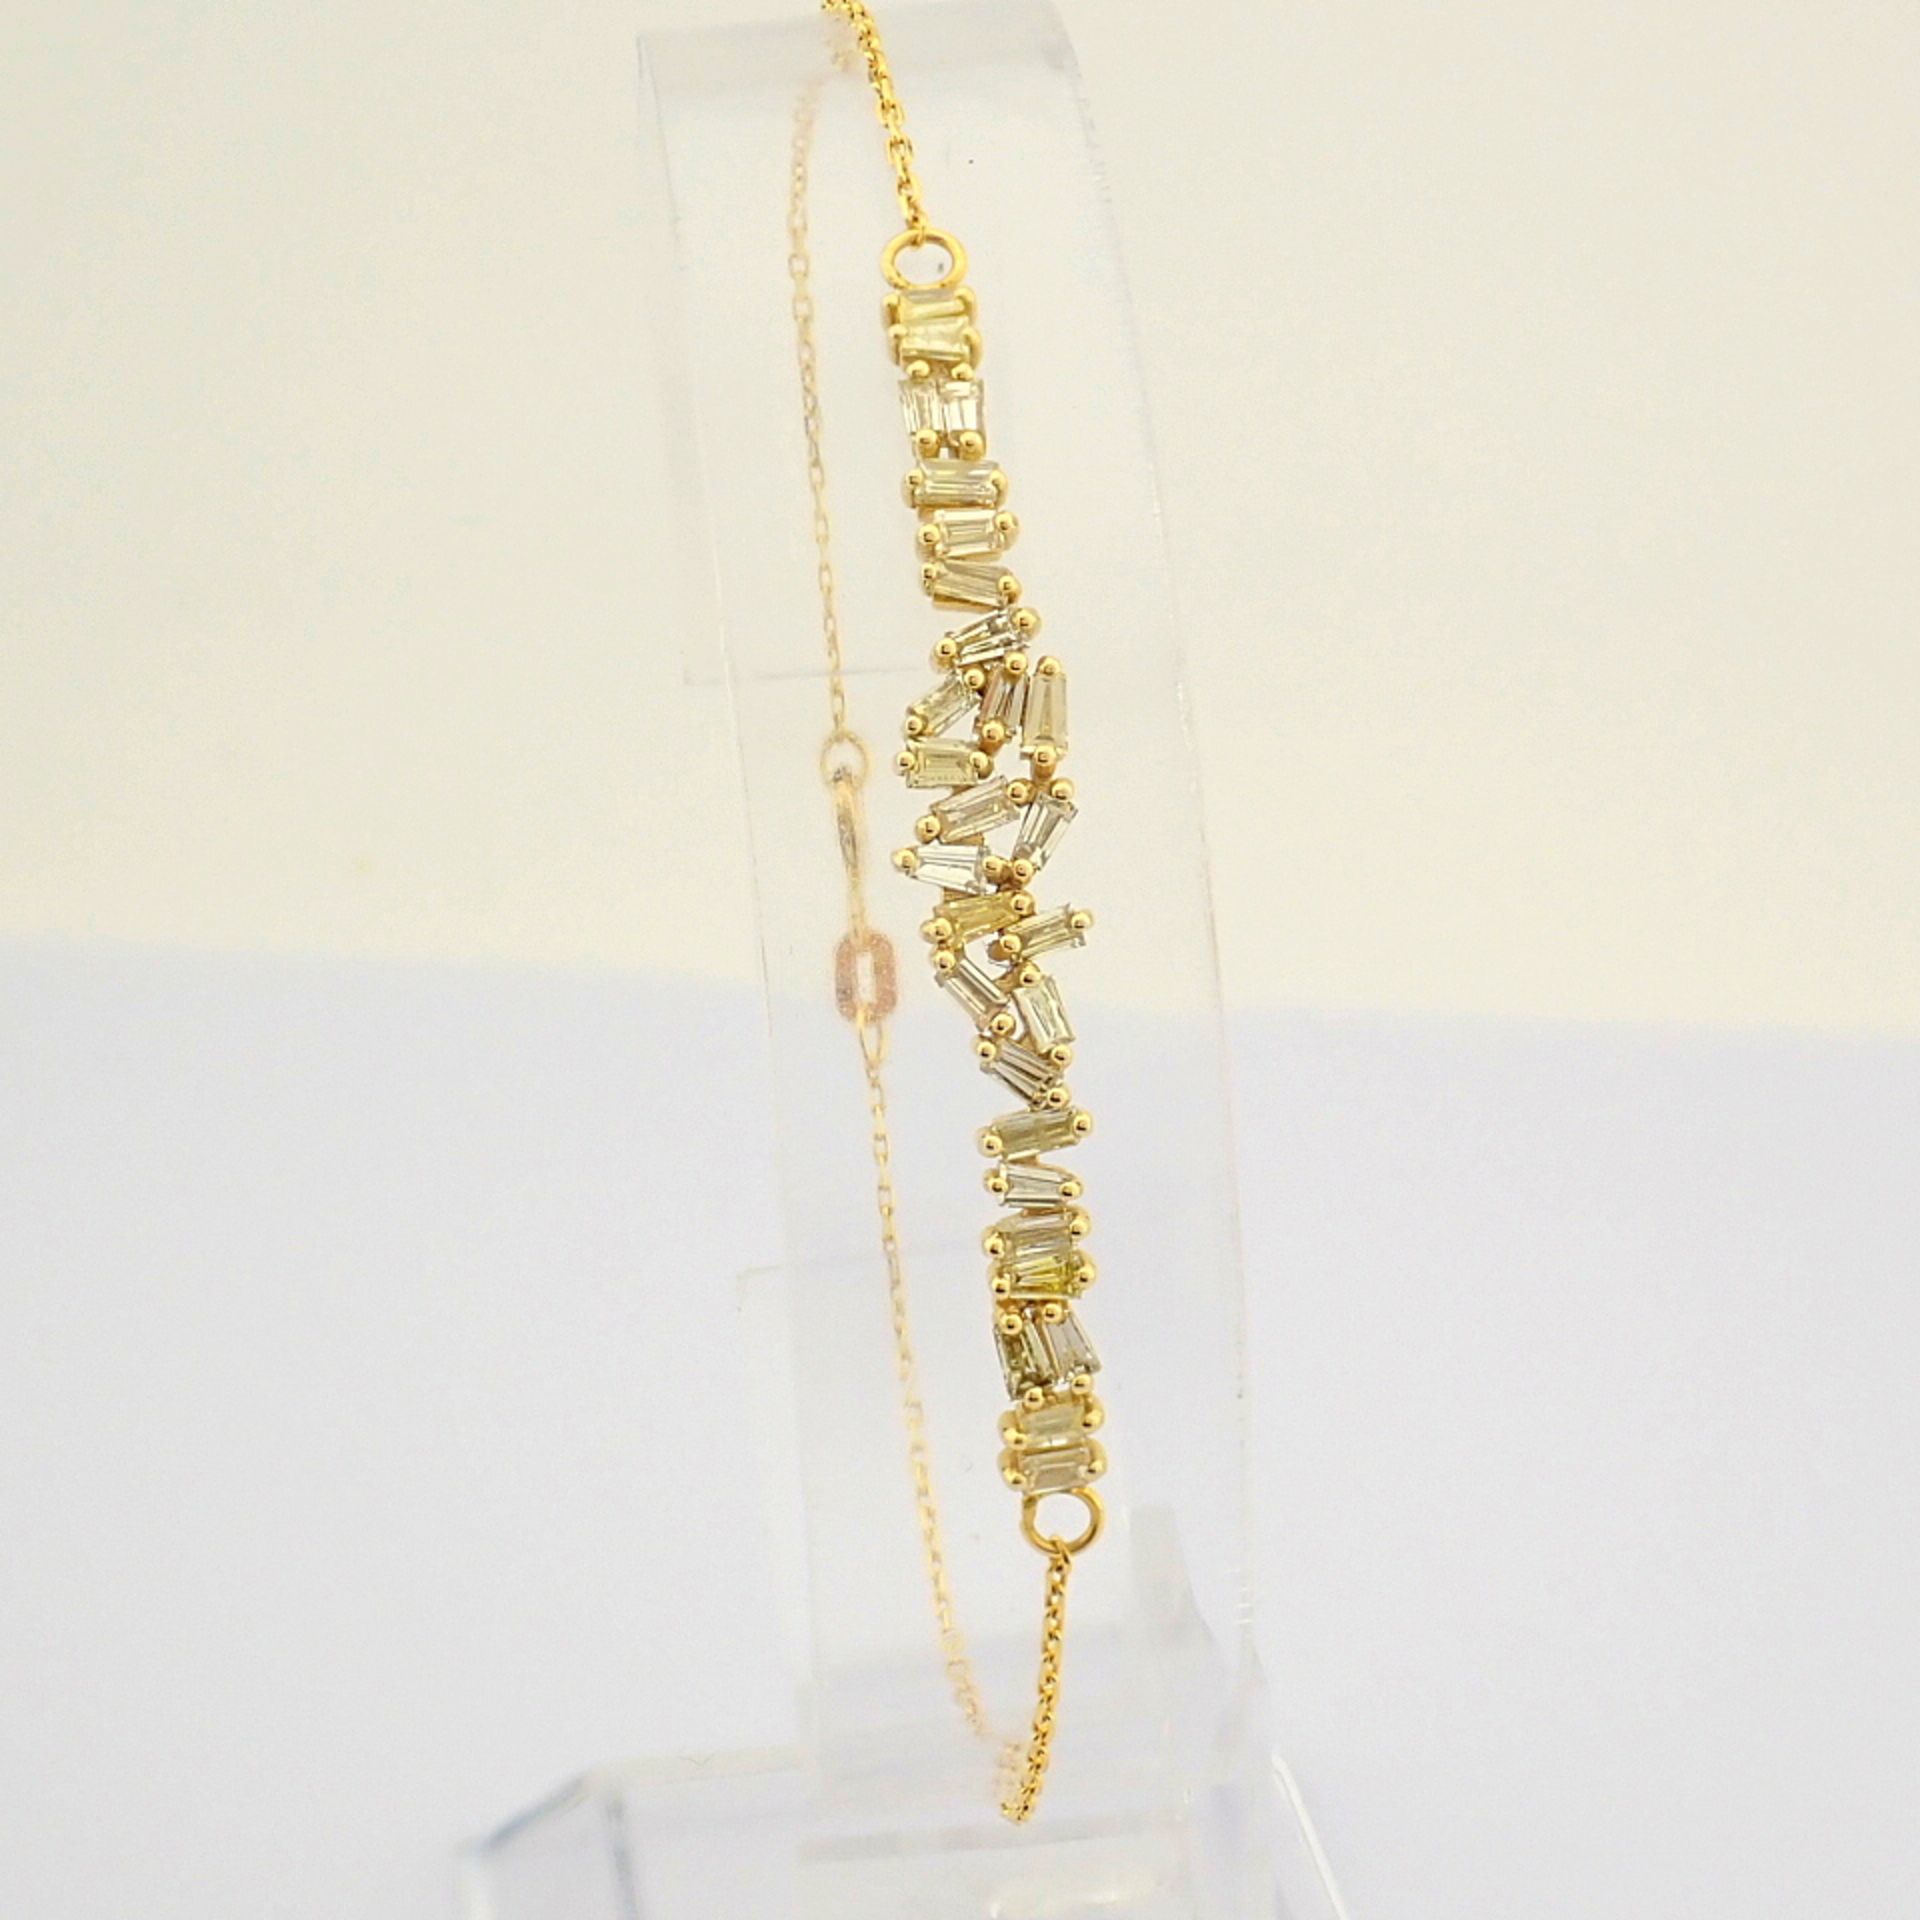 Certificated 14K Yellow Gold Fancy Diamond Bracelet (Total 0.84 ct Stone) - Image 6 of 7